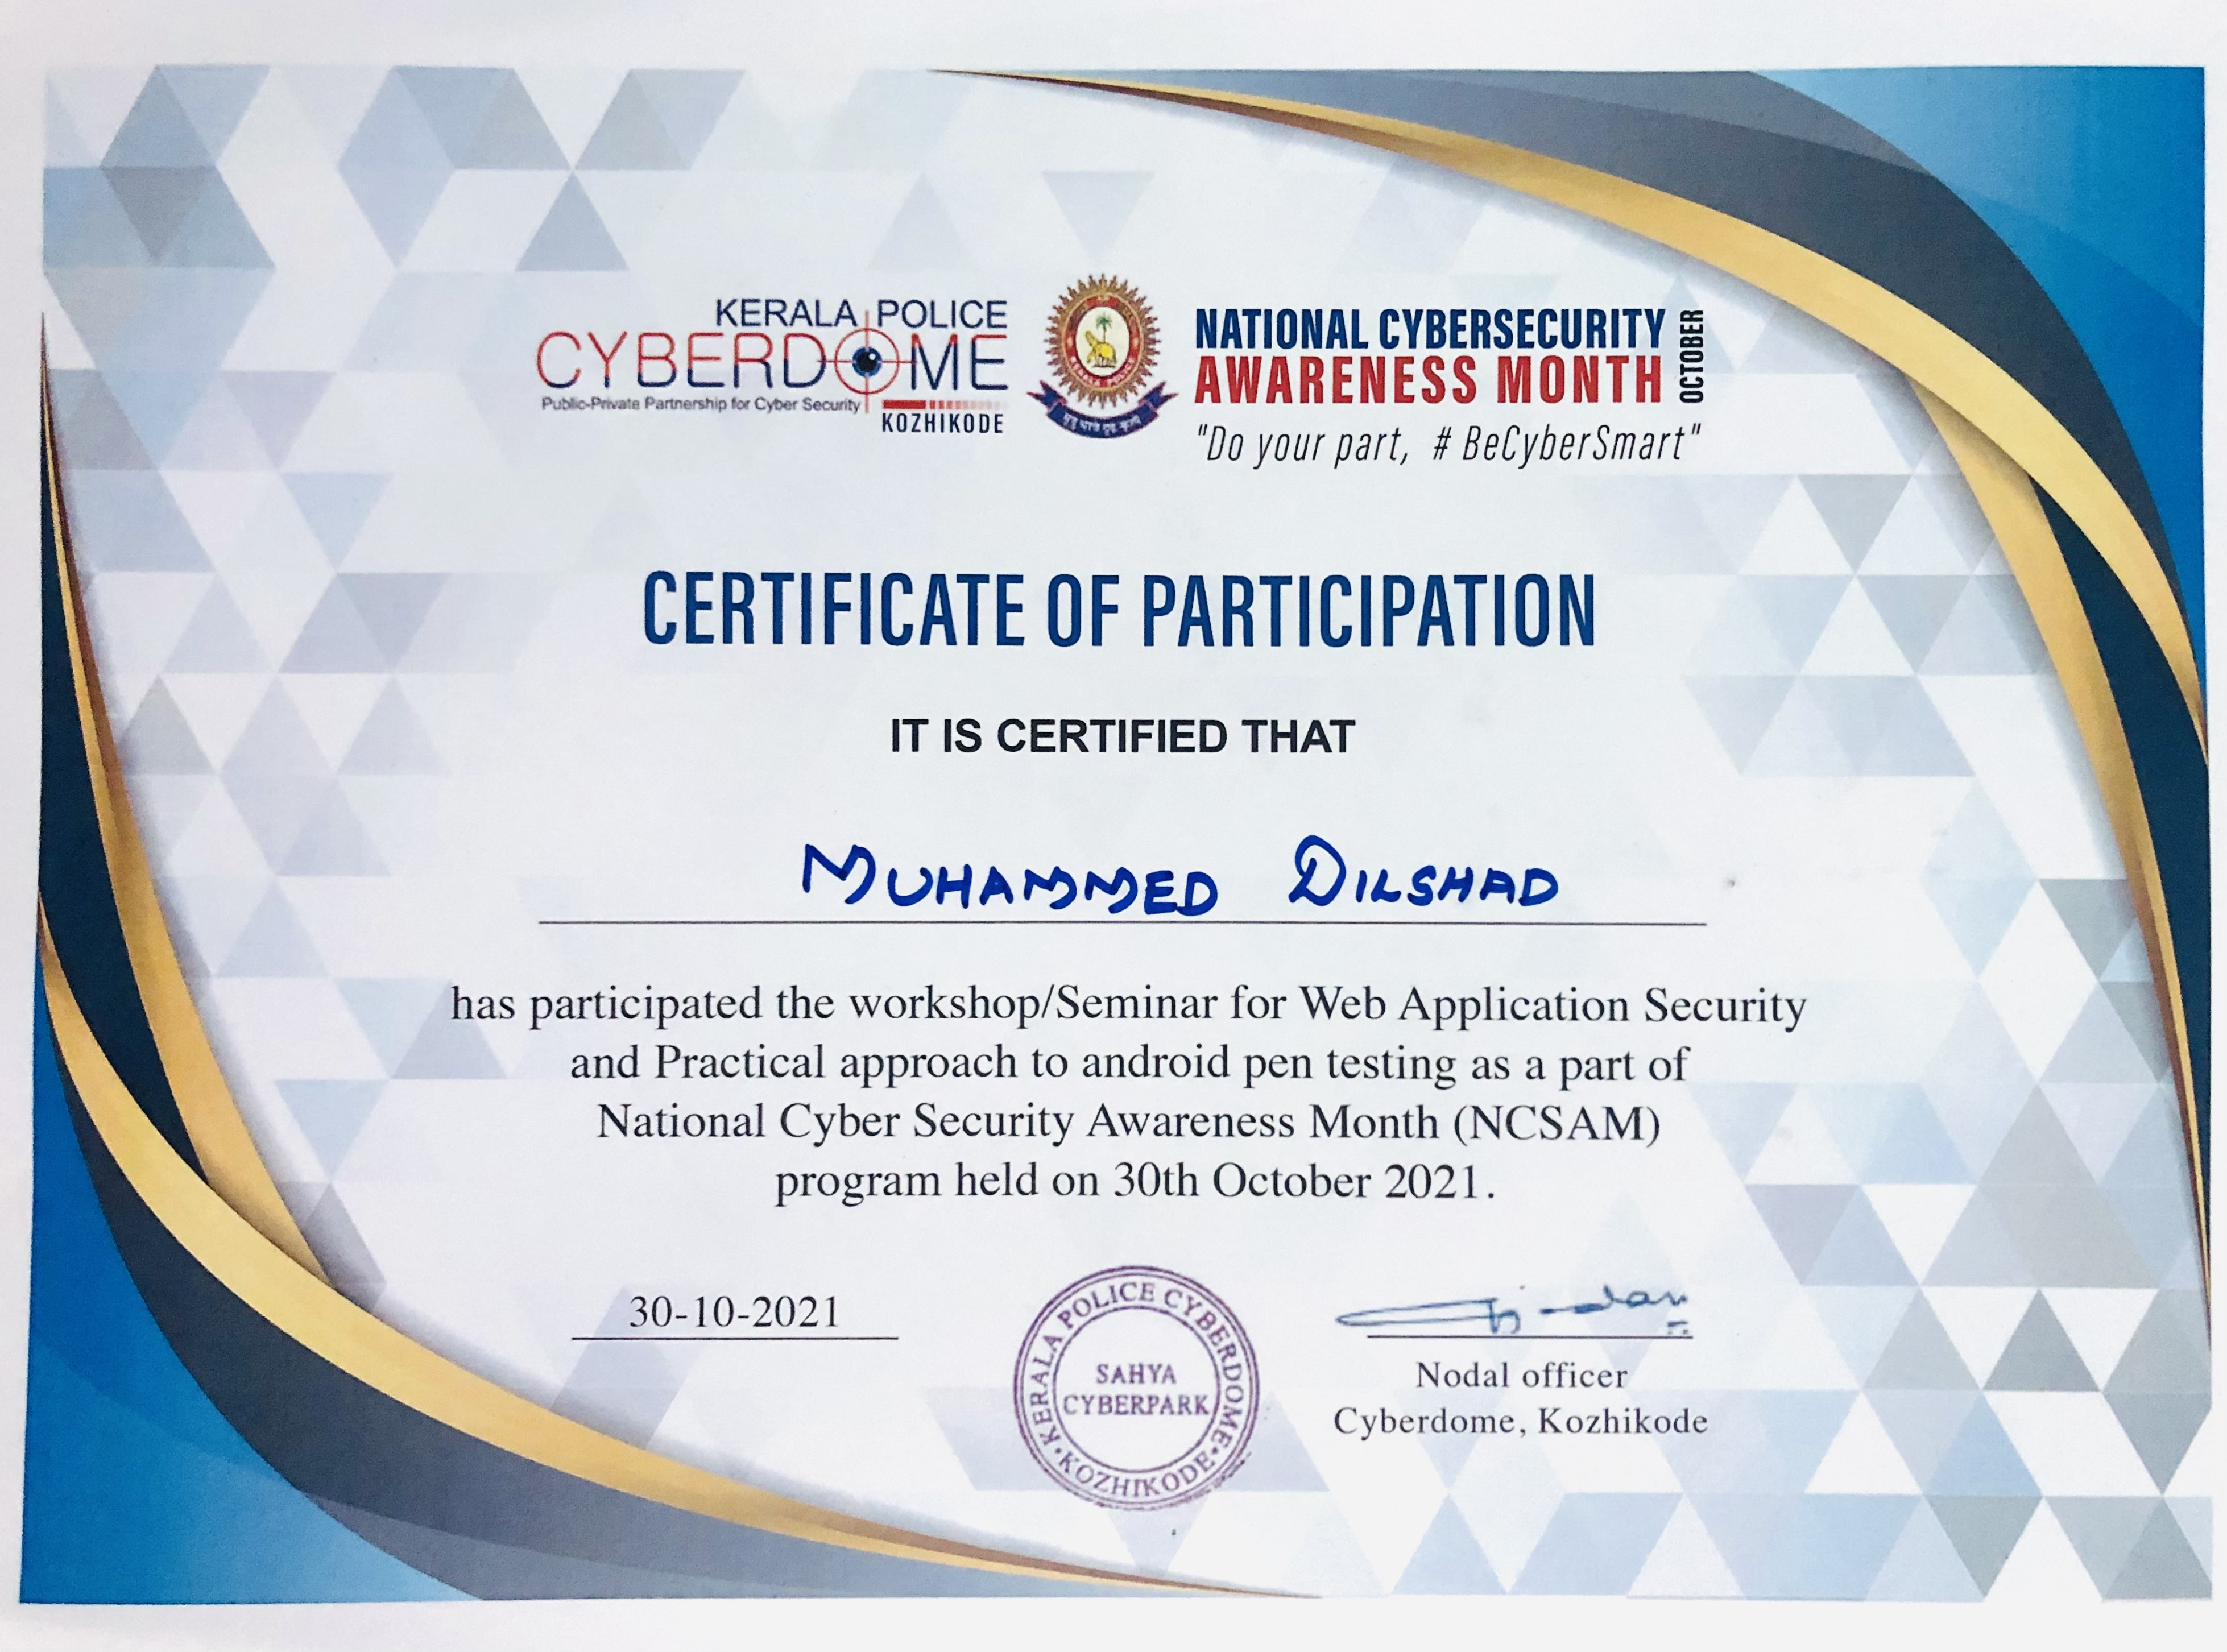 KERALA Nyi= NATIONAL CYBERSECURITY £

CYBERD@ME S56 AWARENESS MONTH 5

Koziikope =F your part, # BeCyberSmart”

CERTIFICATE OF PARTICIPATION

IT IS CERTIFIED THAT

    
   
  
  
 
  
    
 

     

NMouramMED Disnap

has participated the workshop/Seminar for Web Application Security
and Practical approach to android pen testing as a part of
National Cyber Security Awareness Month (NCSAM)
program held on 30th October 2021.

— ——

  

30-10-2021
Nodal officer
Cyberdome, Kozhikode